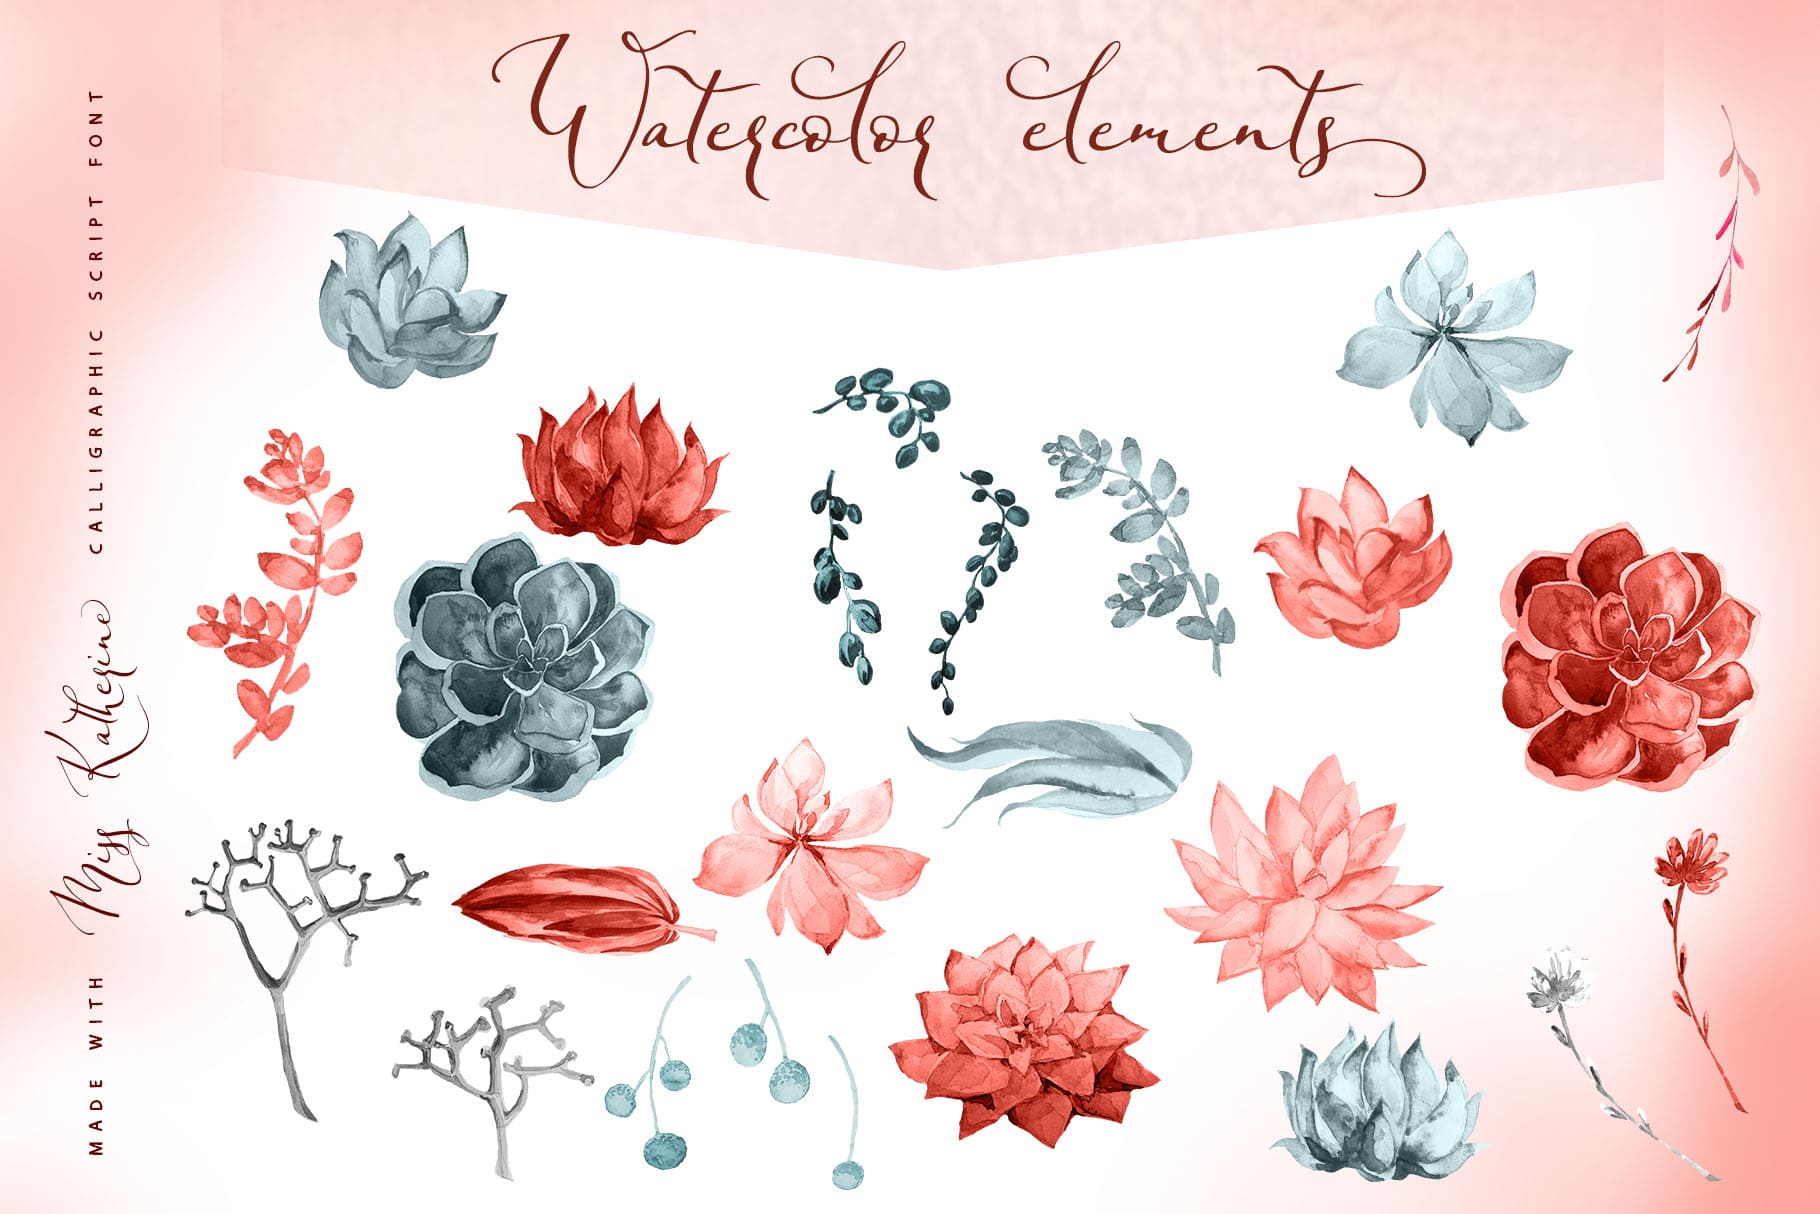 Watercolor elements for your project.